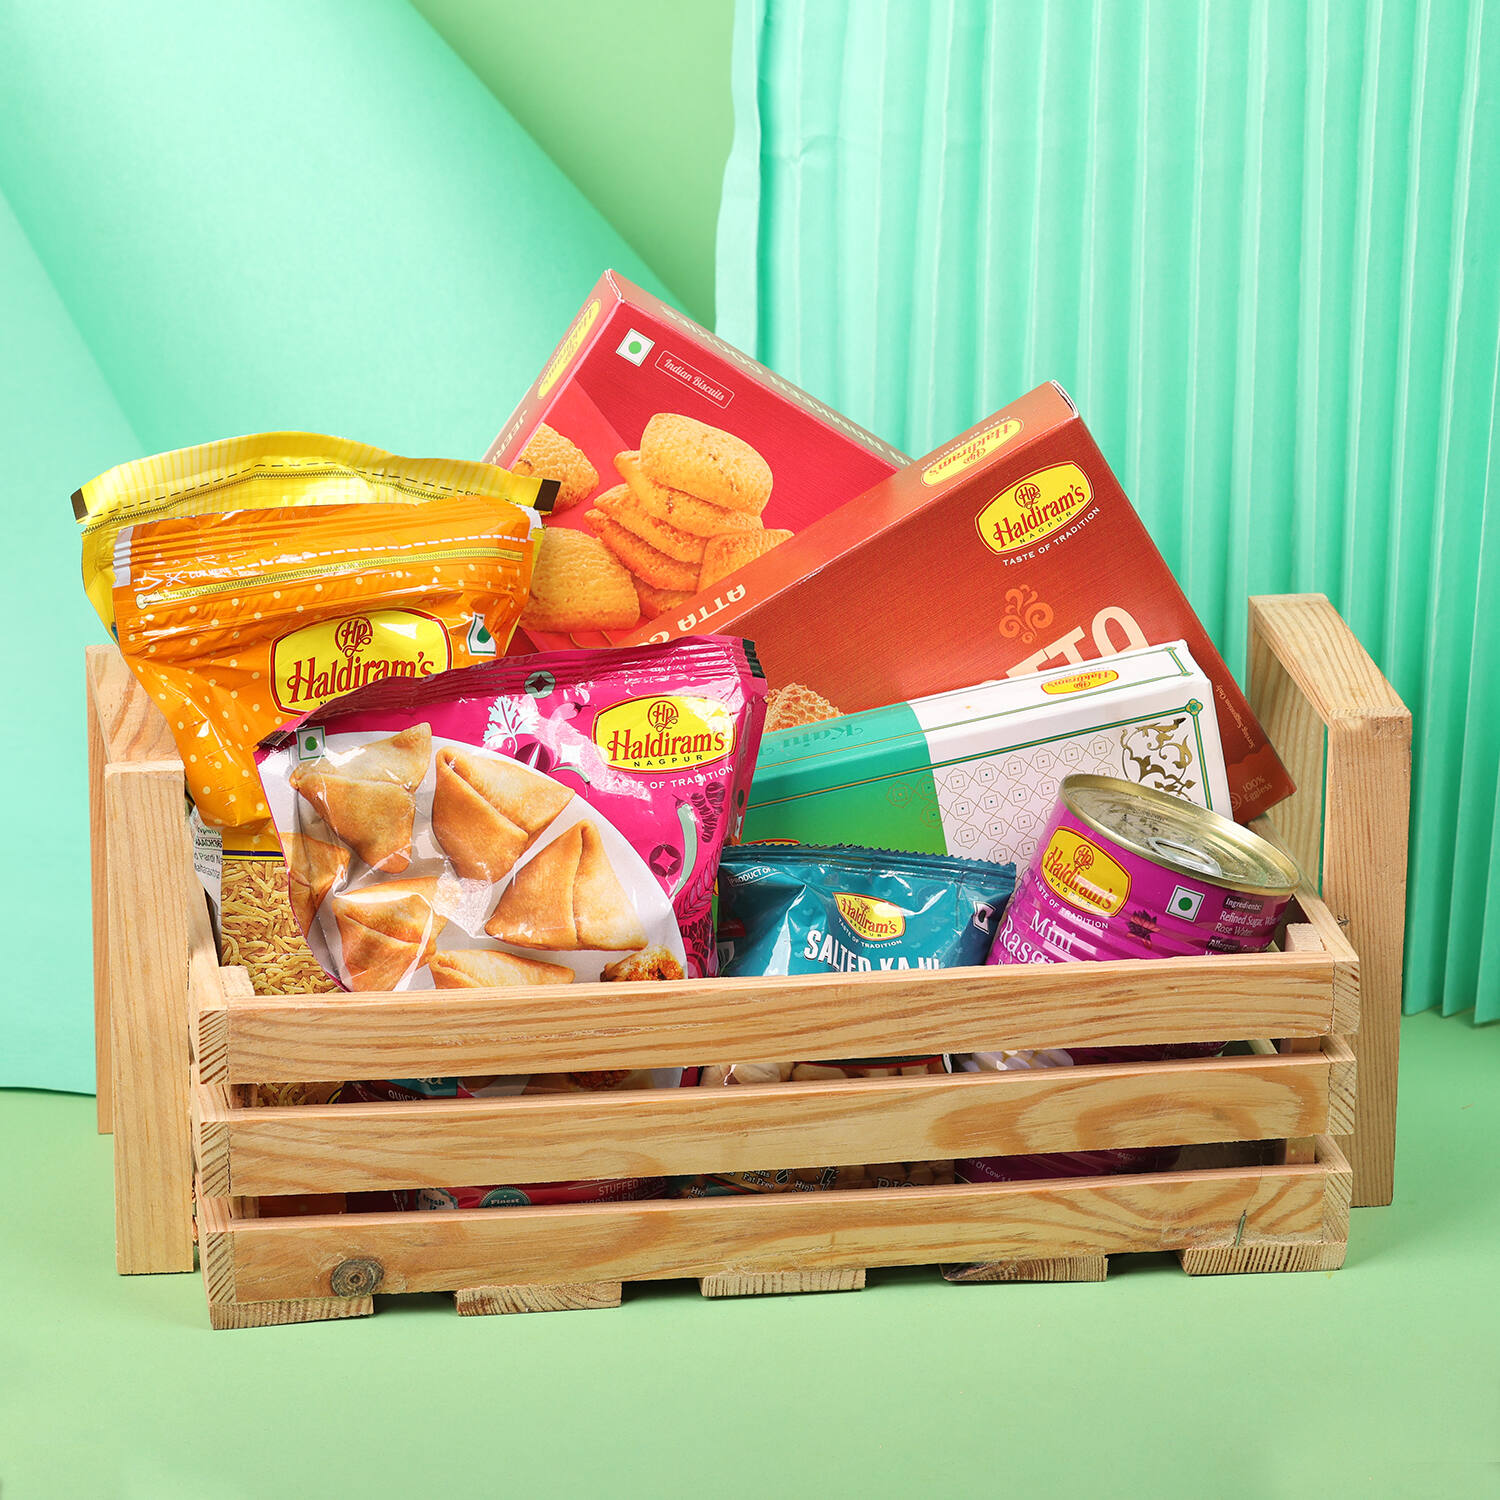 HyperFoods Saugaat 1 Diwali Gift Hamper Sweets Gift Pack Festive Gift Box  Price in India - Buy HyperFoods Saugaat 1 Diwali Gift Hamper Sweets Gift  Pack Festive Gift Box online at Flipkart.com